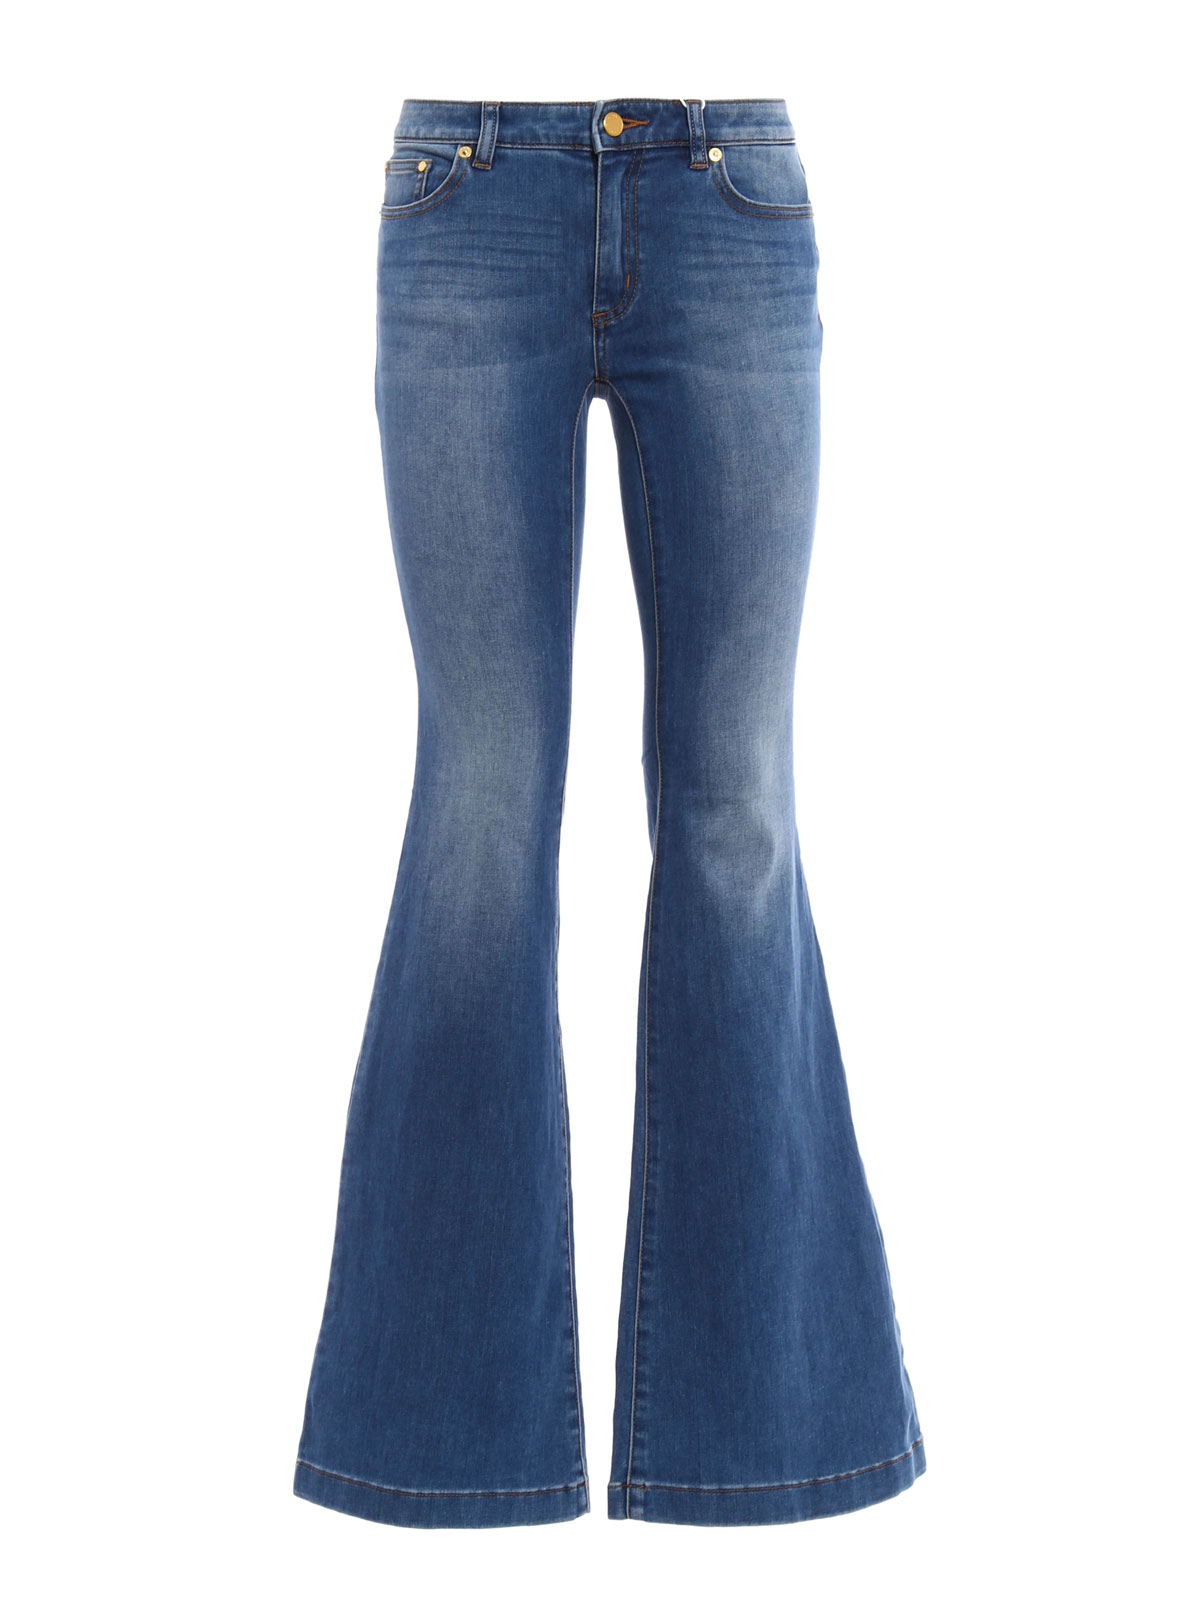 Selma Flare jeans by Michael Kors - flared jeans | iKRIX